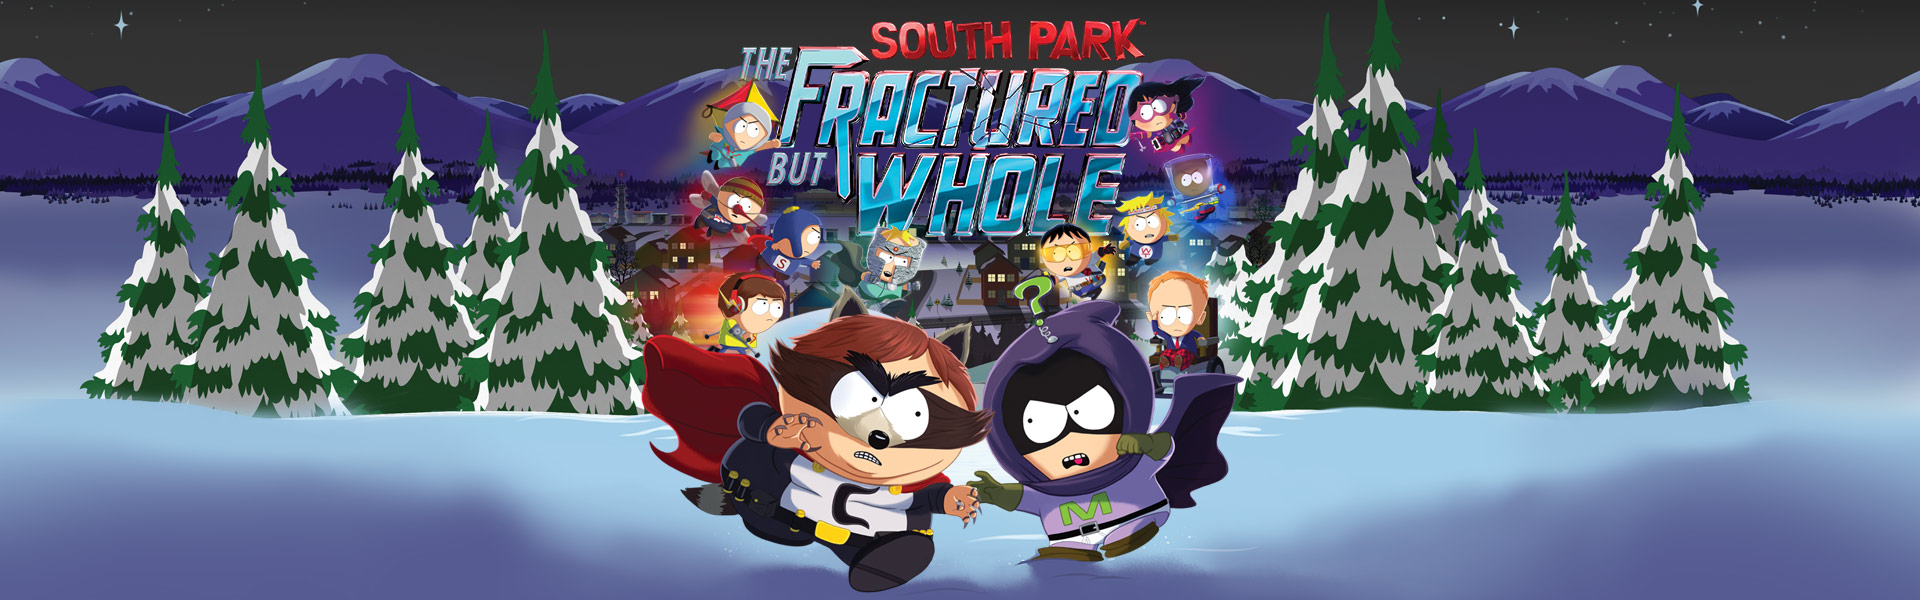 south park fractured b ut whole free